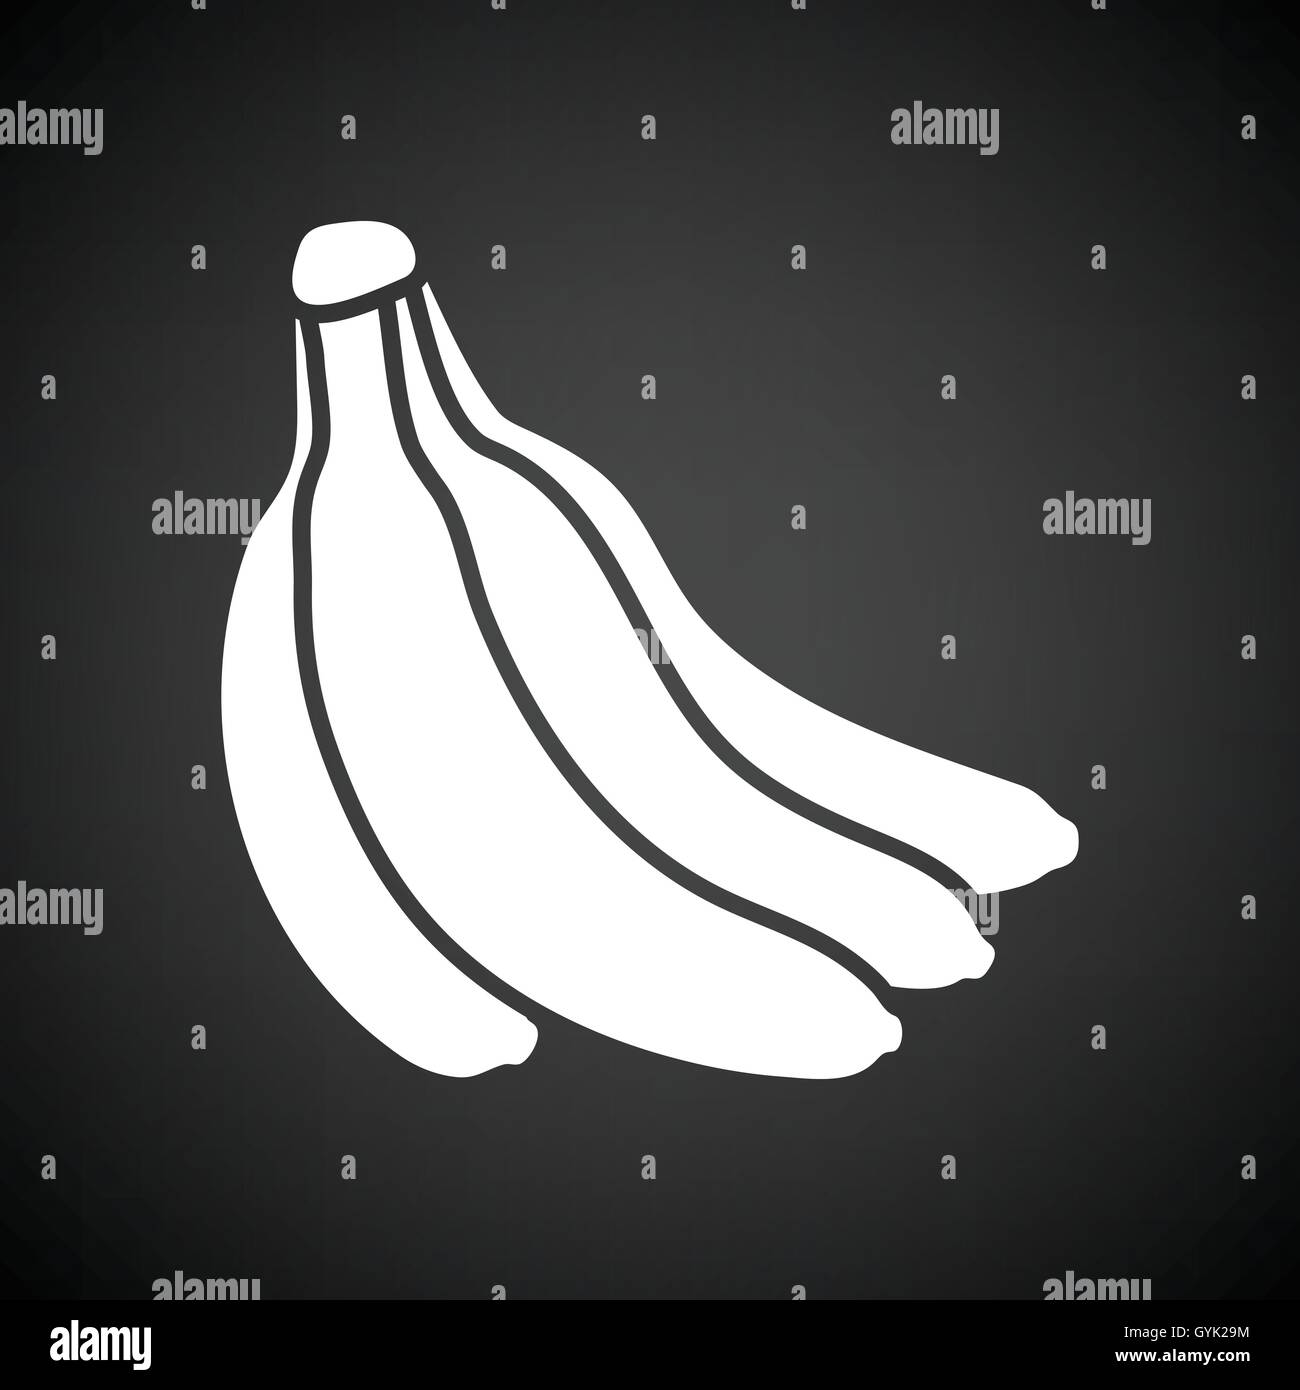 Banana icon. Black background with white. Vector illustration. Stock Vector